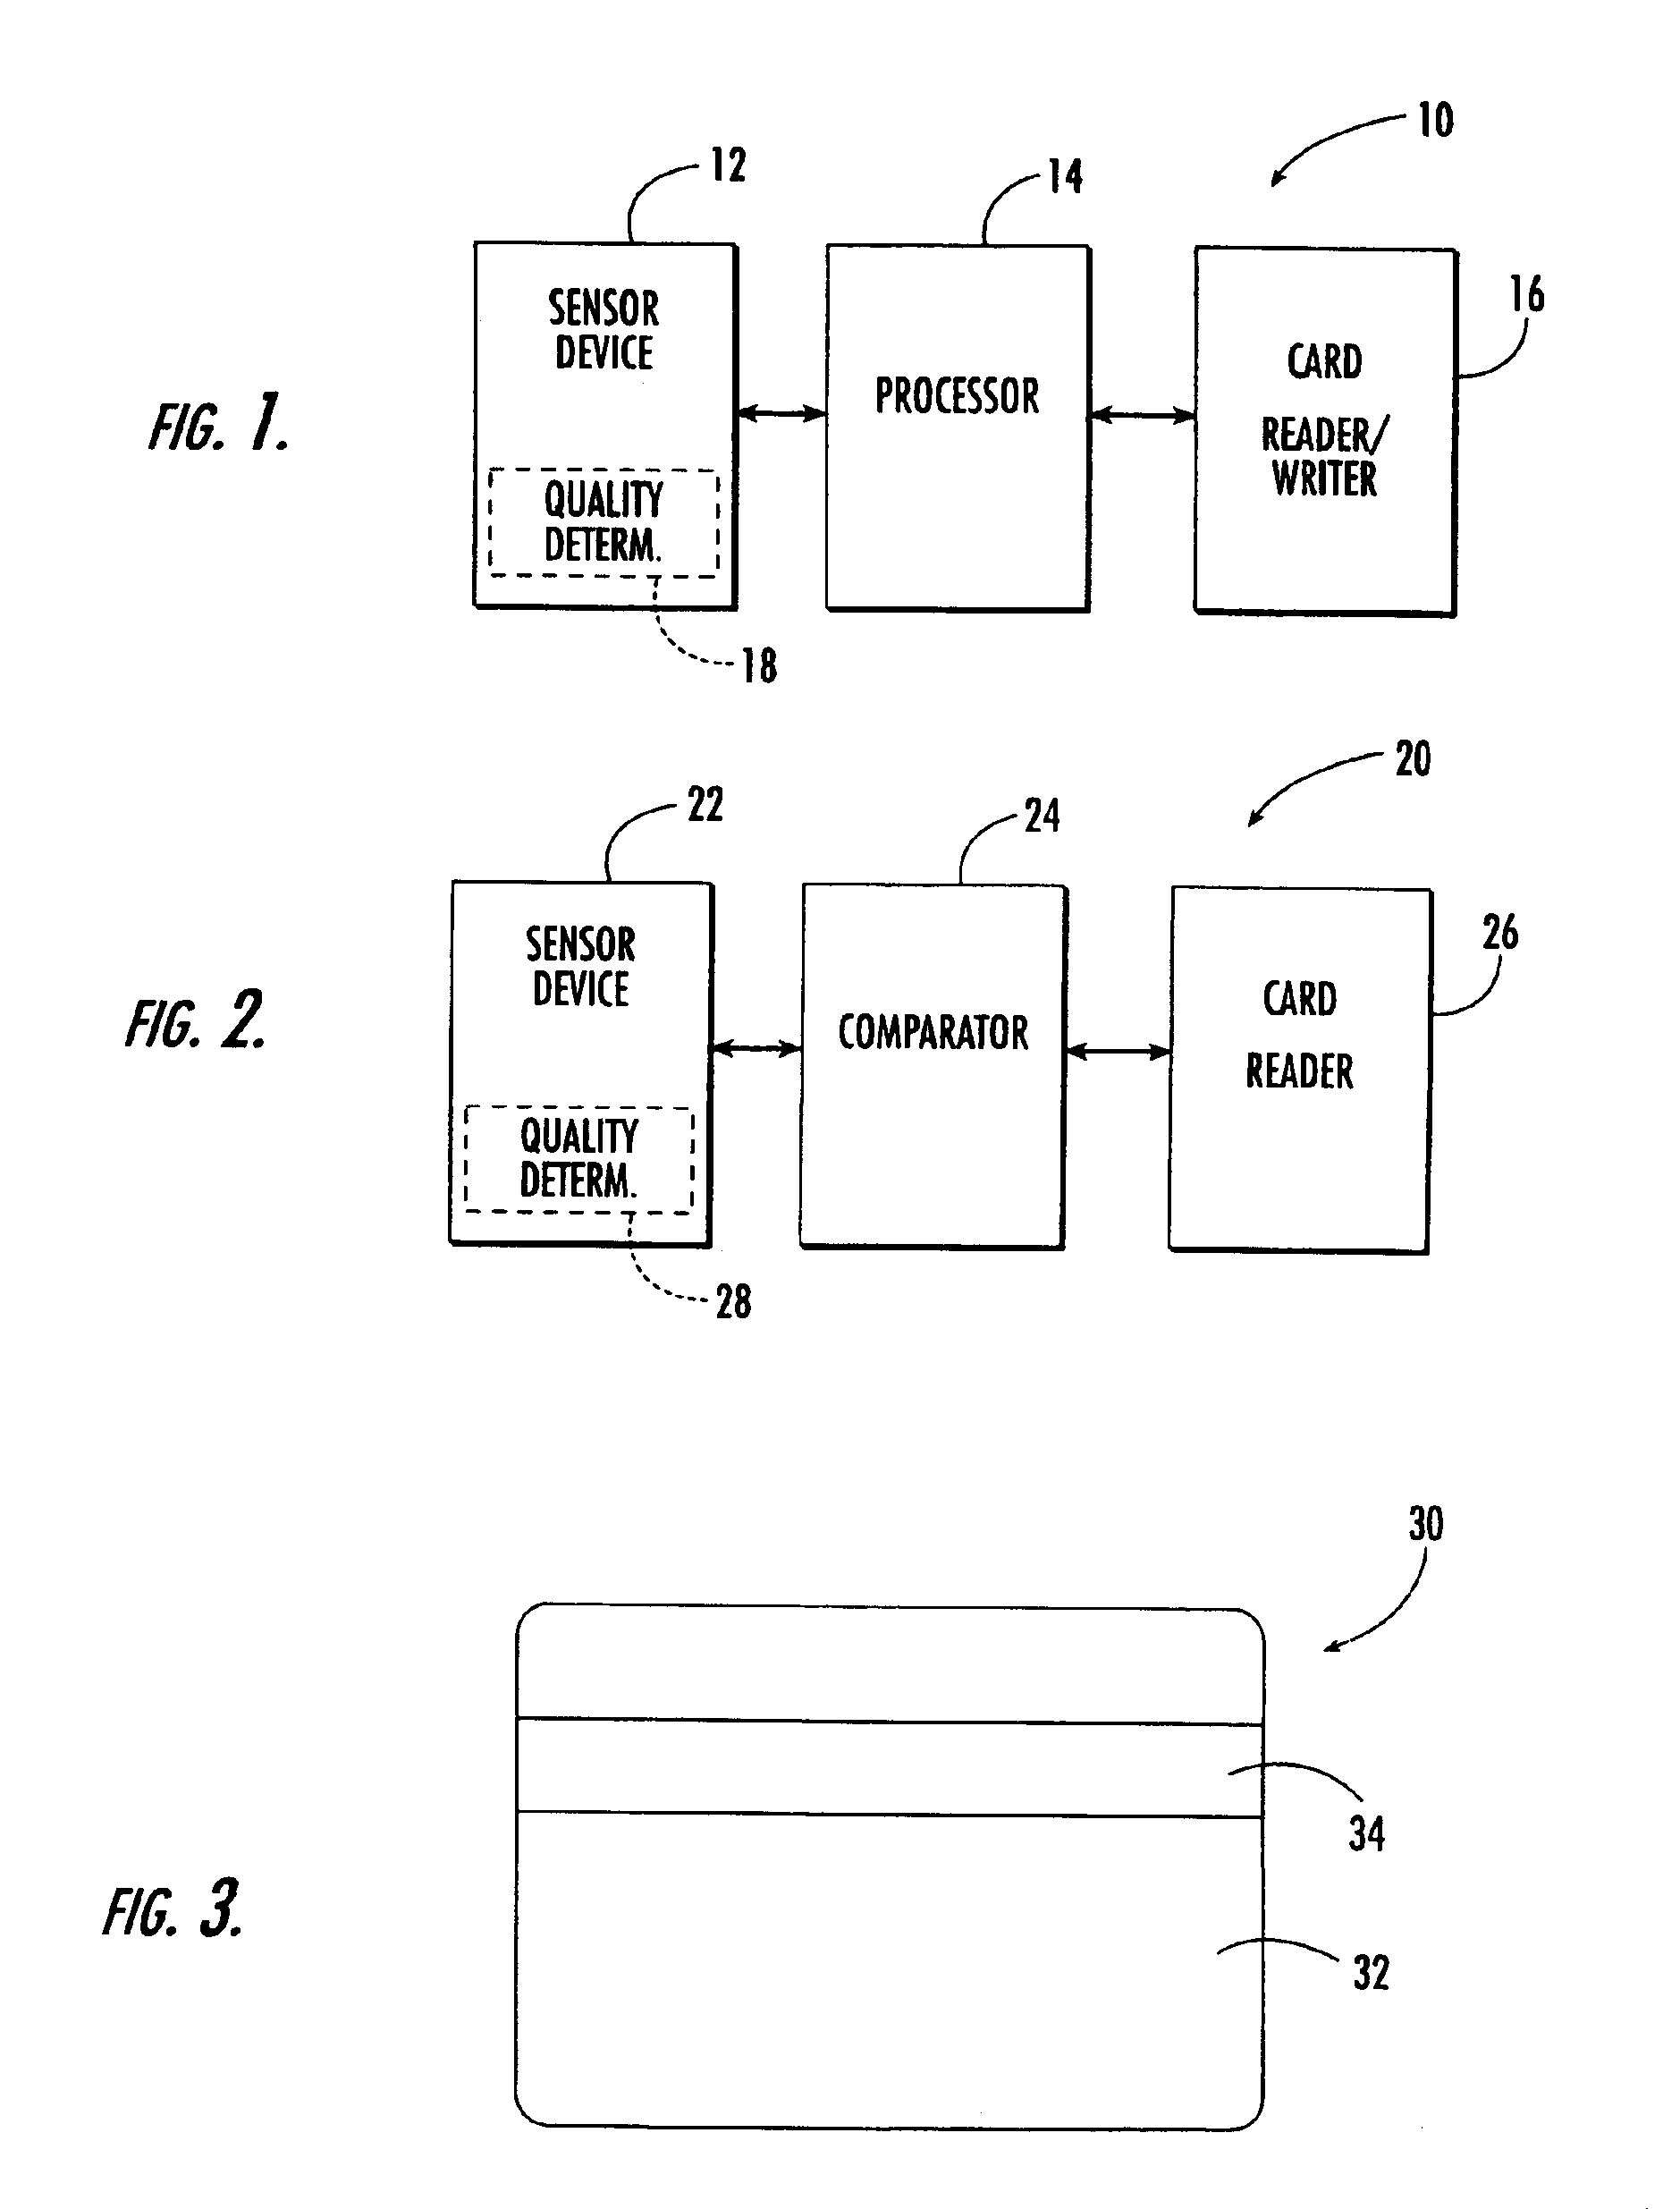 Biometric identification system using biometric images and personal identification number stored on a magnetic stripe and associated methods